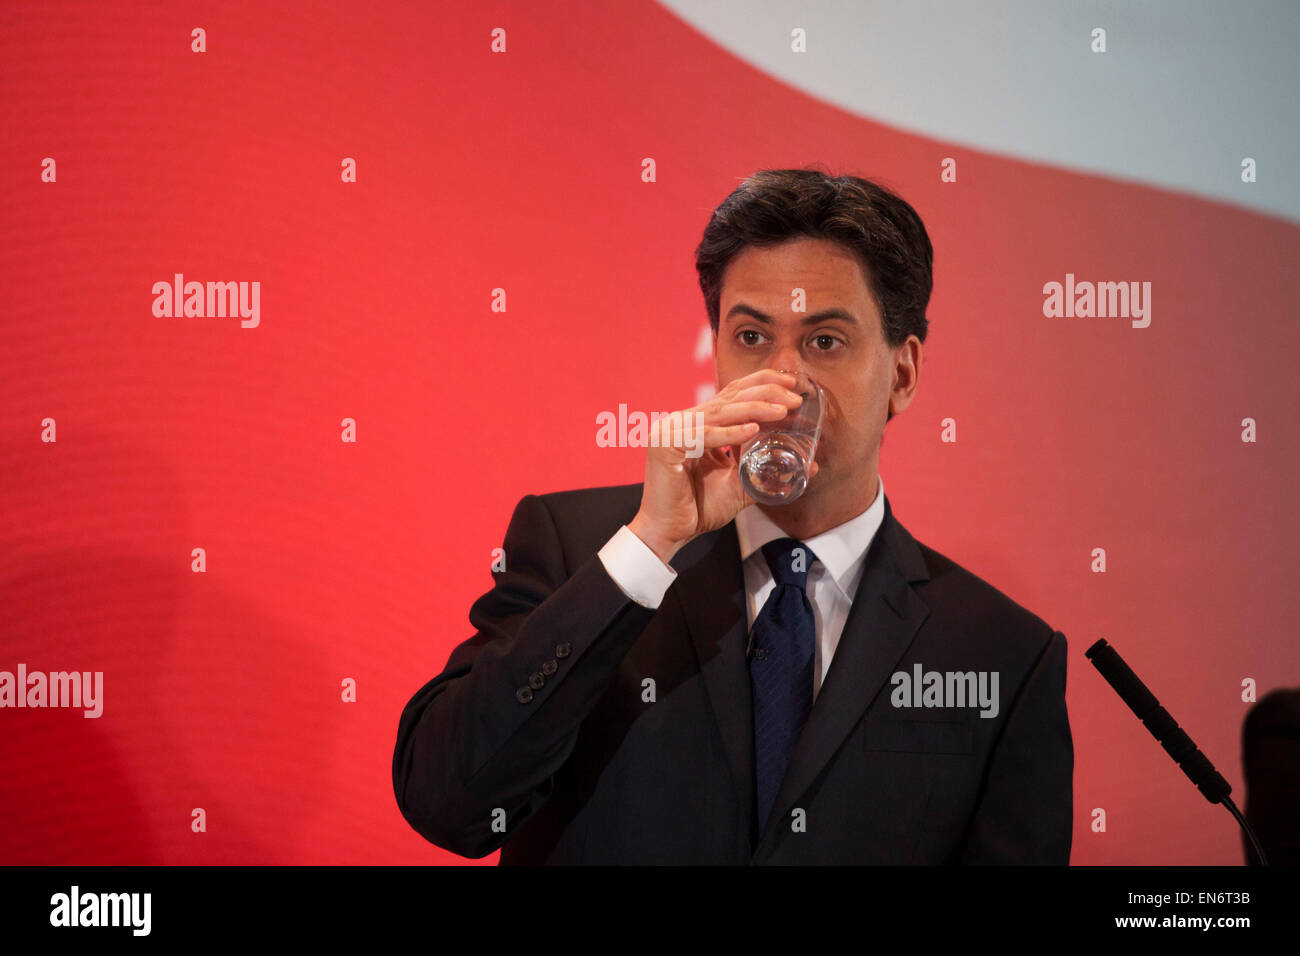 London, UK. Wednesday 29th April 2015. Labour Party Leader Ed Miliband speaks at a General Election 2015 campaign event on the Tory threat to family finances, entitled: The Tories’ Secret Plan. Held at the Royal Institute of British Architects. Credit:  Michael Kemp/Alamy Live News Stock Photo